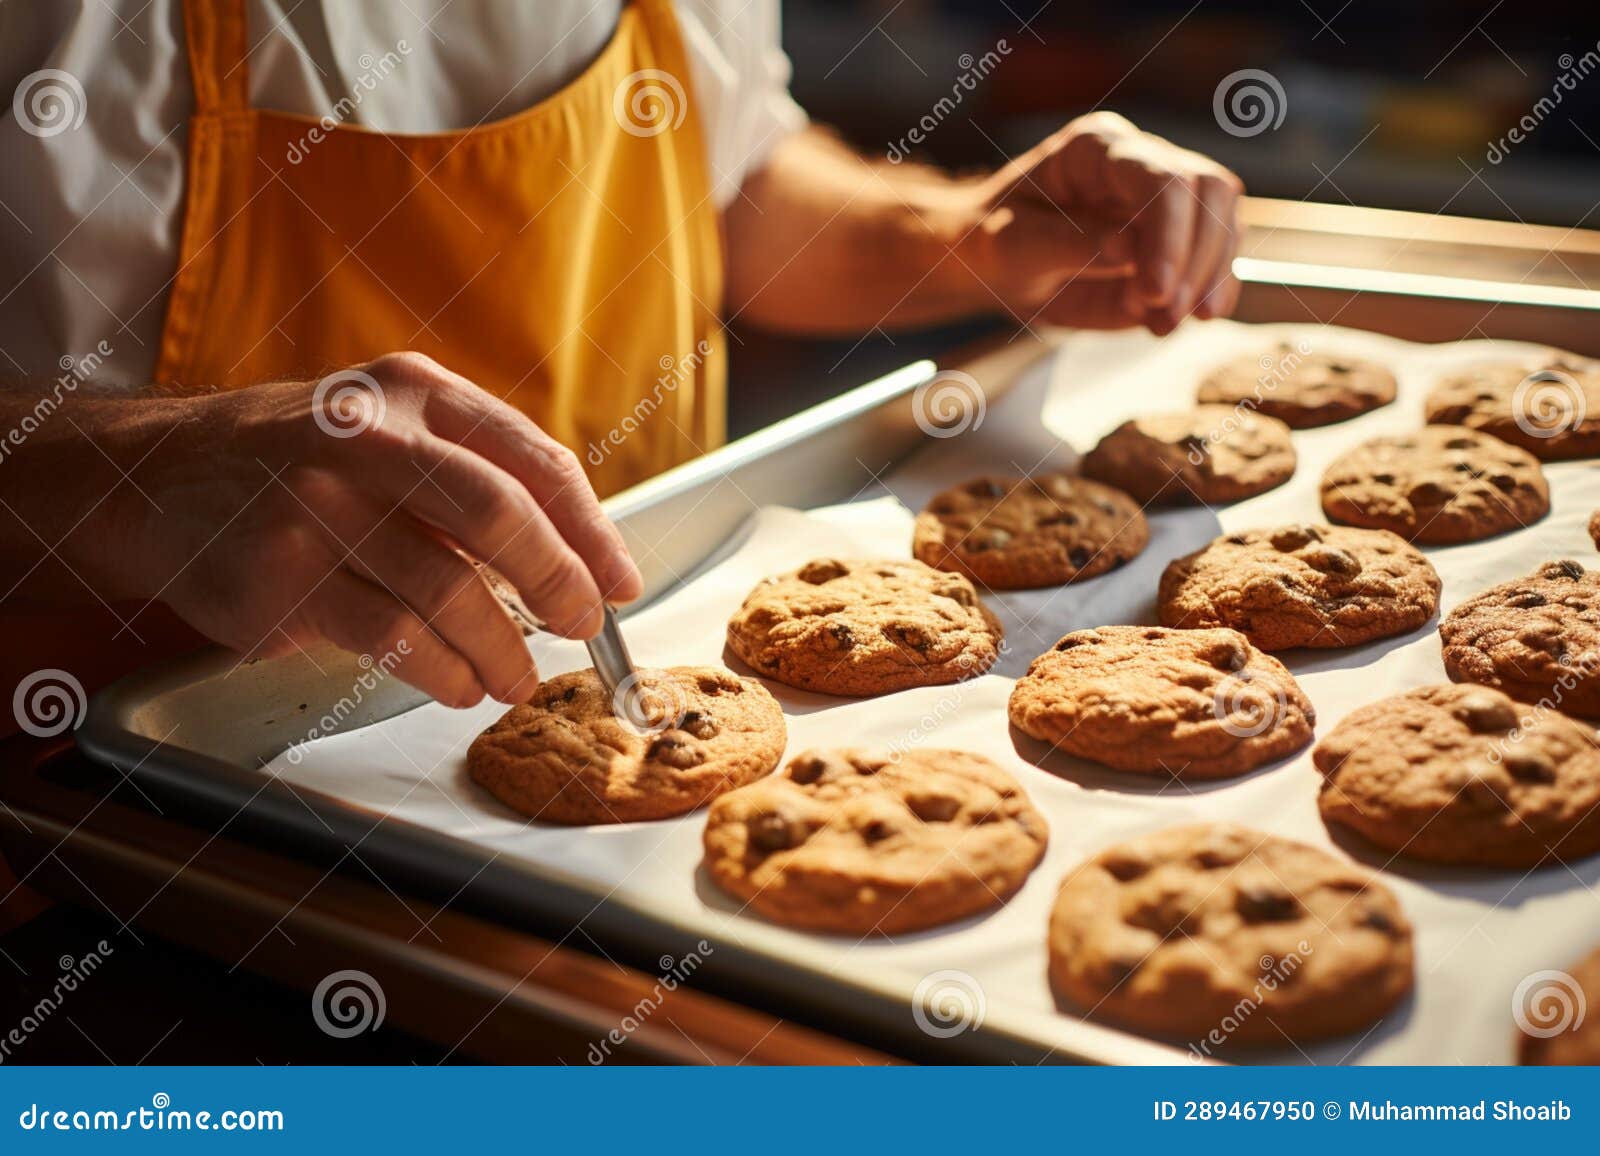 a proficient baker skillfully conveys a tray of warm, mouthwatering cookies